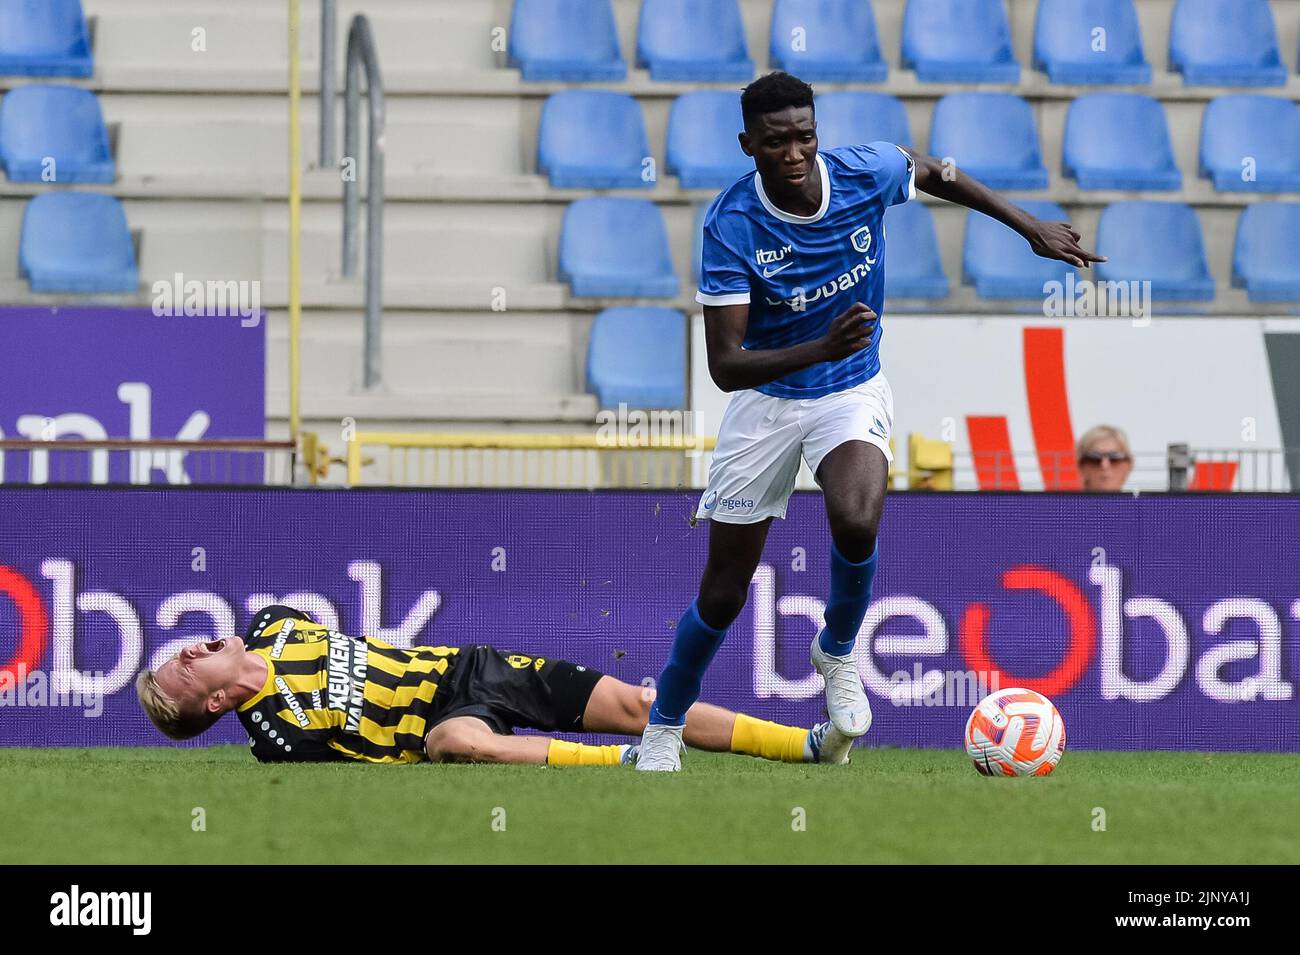 Jong Genk's Ibrahima Sory Bangoura pictured in action during a soccer match between Jong Genk and Lierse Kempenzonen, Sunday 14 August 2022 in Genk, on day 1 of the 2022-2023 'Challenger Pro League' second division of the Belgian championship. BELGA PHOTO JILL DELSAUX Stock Photo